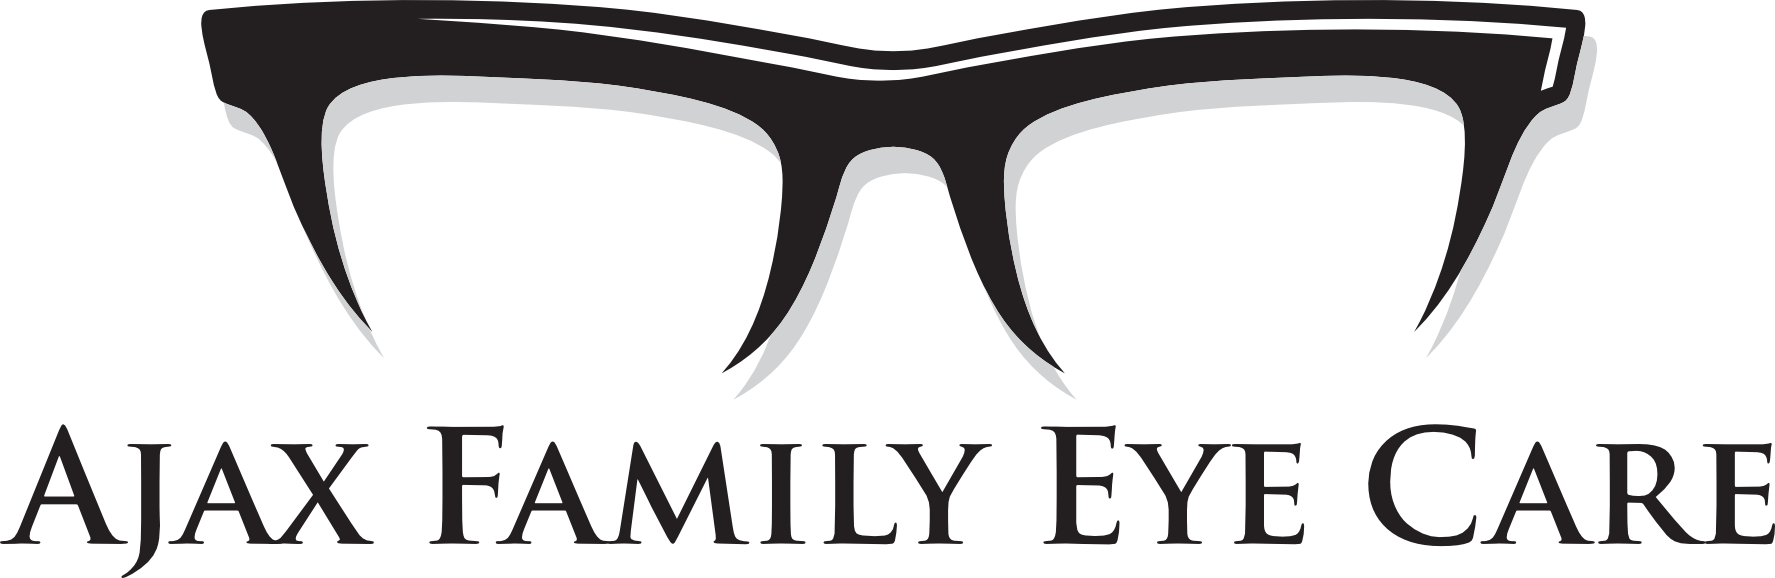 A Logo Of A Pair Of Glasses